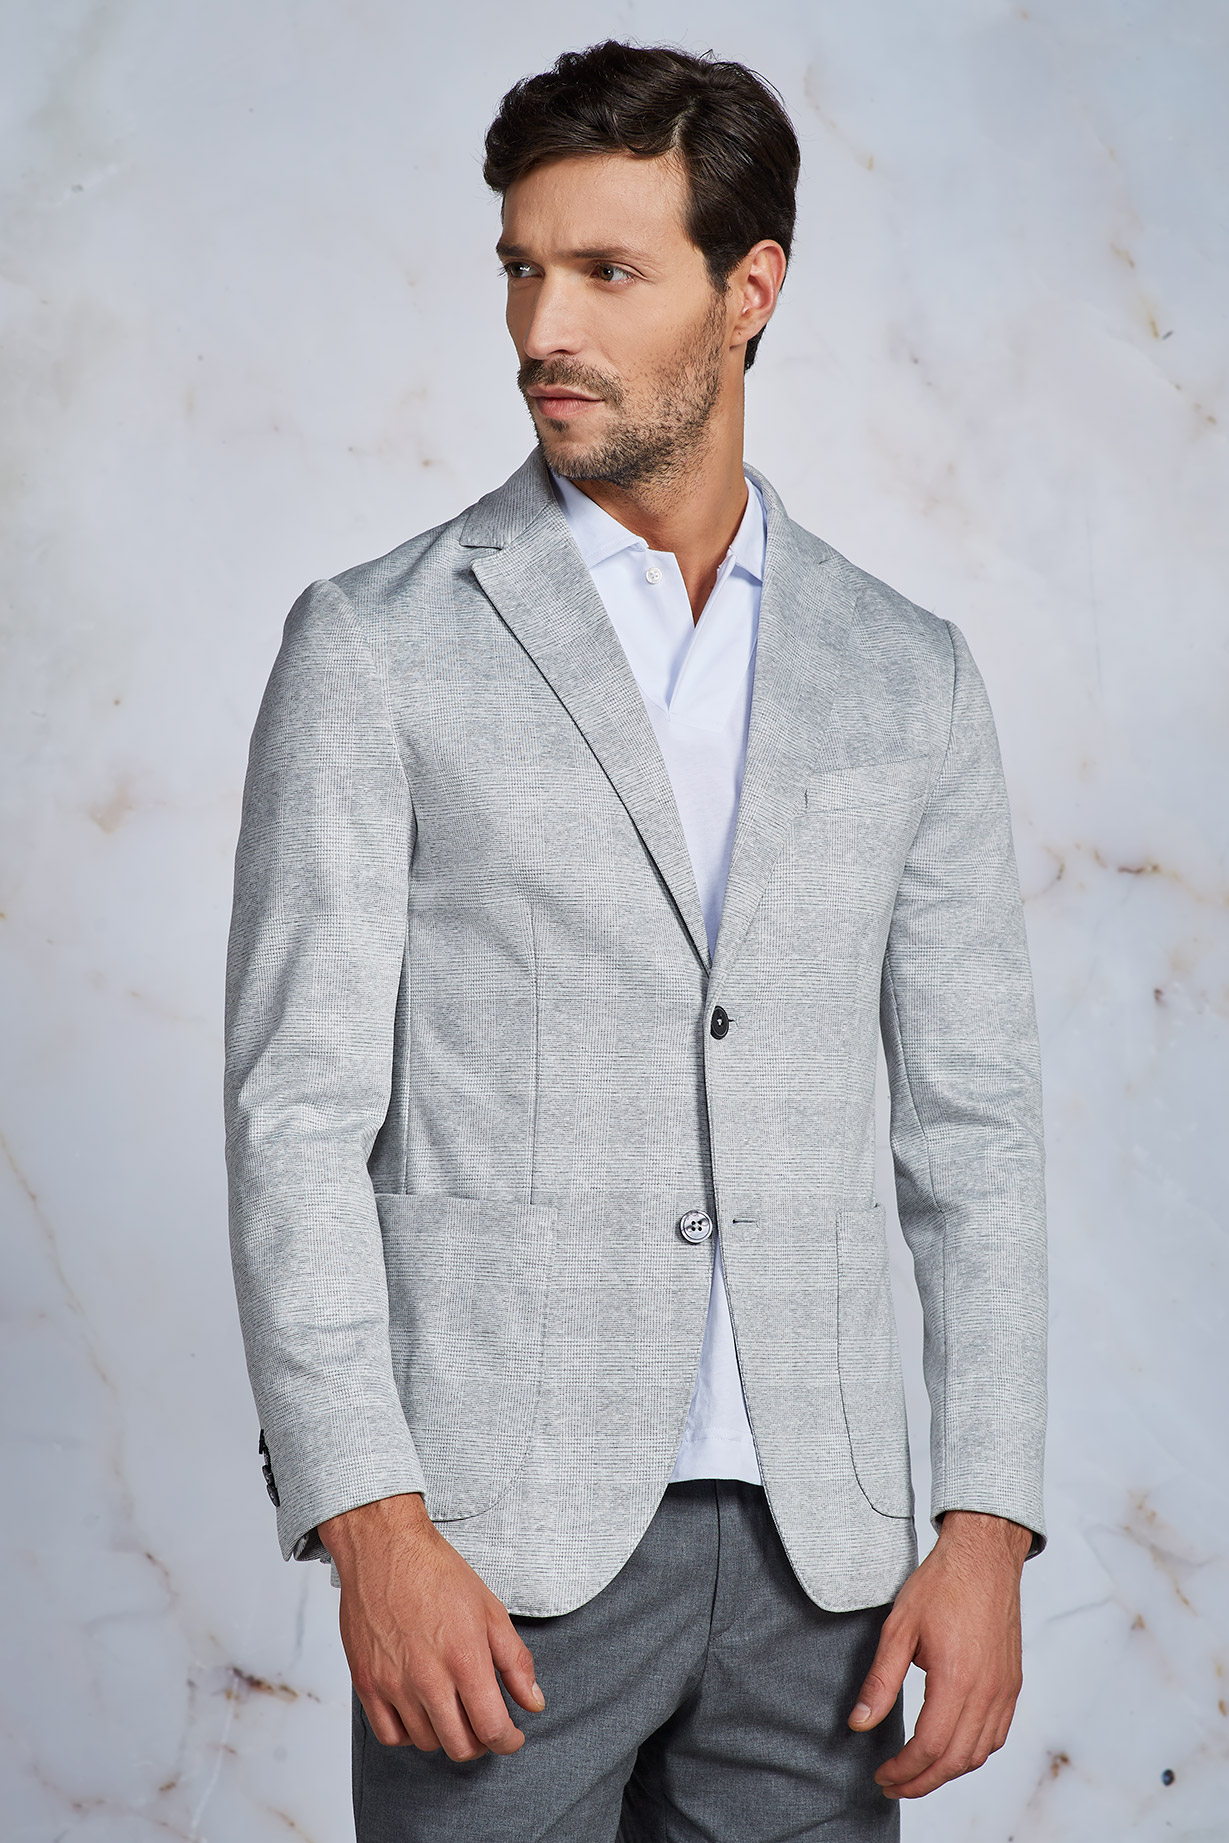 GIACCA JERSEY GALLES GRIGIO